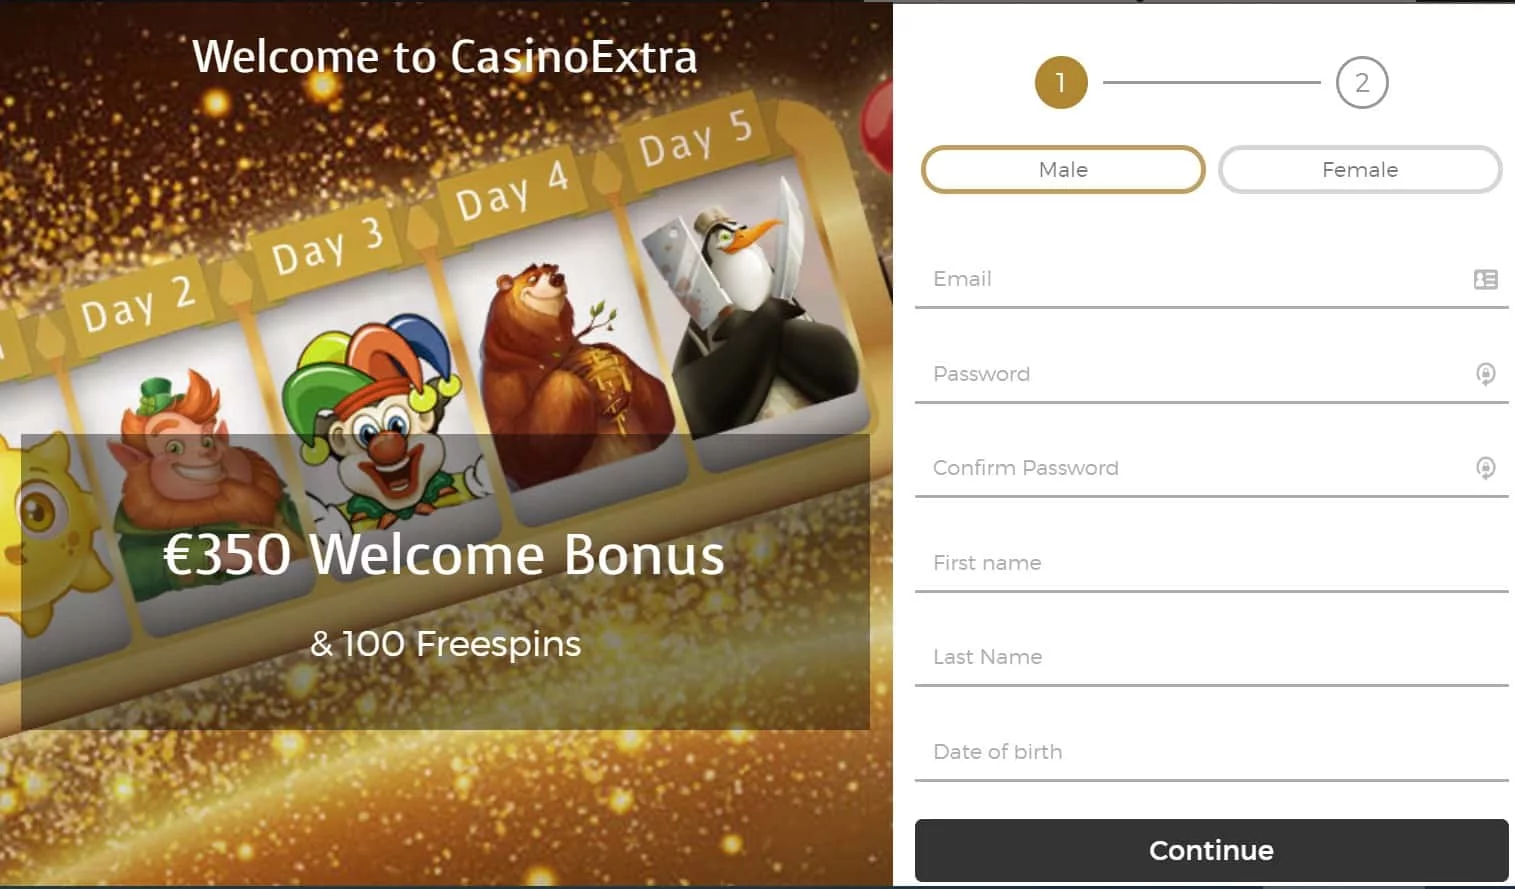 Casino Extra Sign Up Page